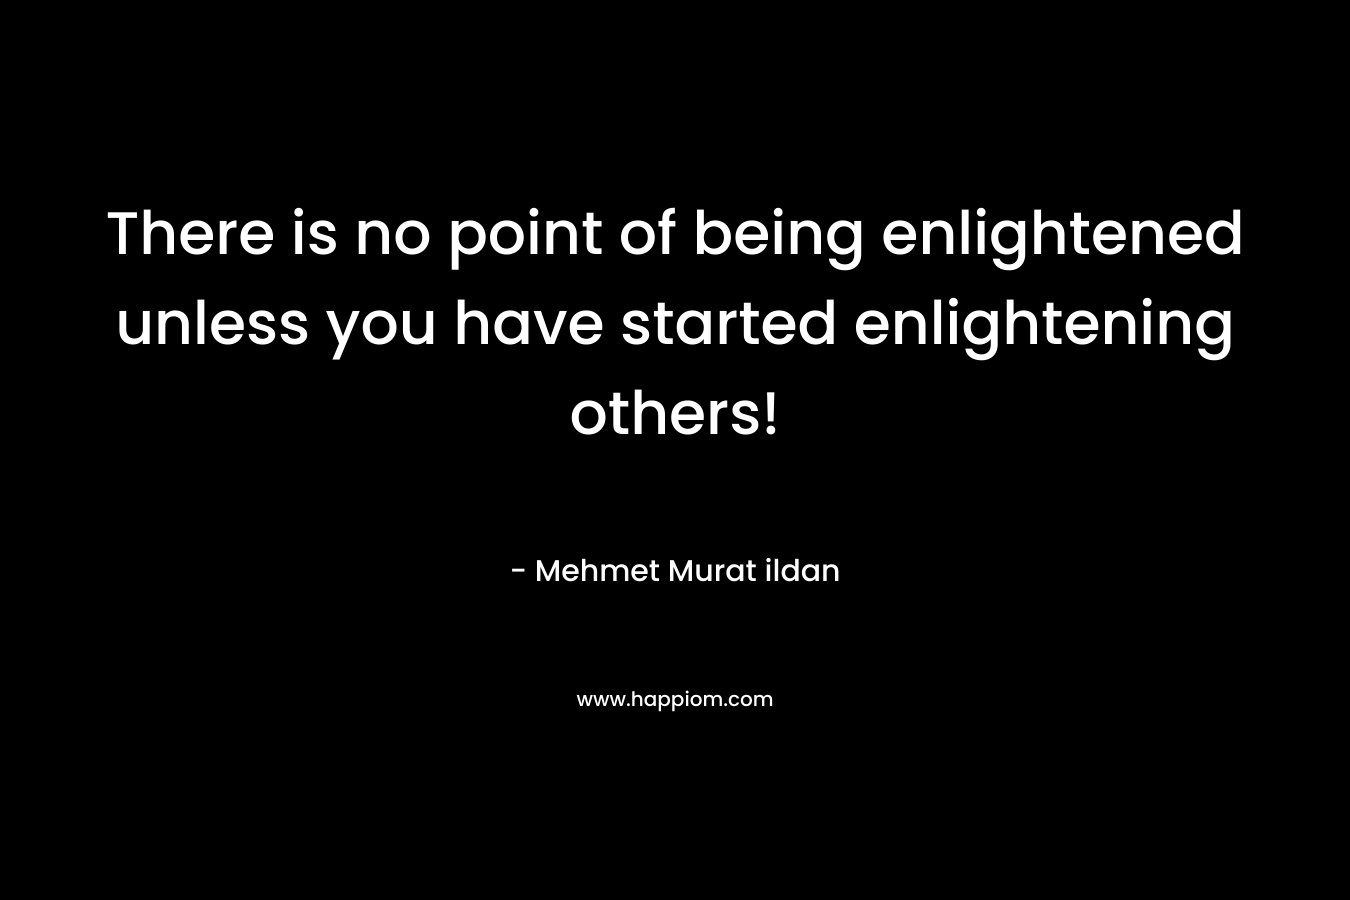 There is no point of being enlightened unless you have started enlightening others!